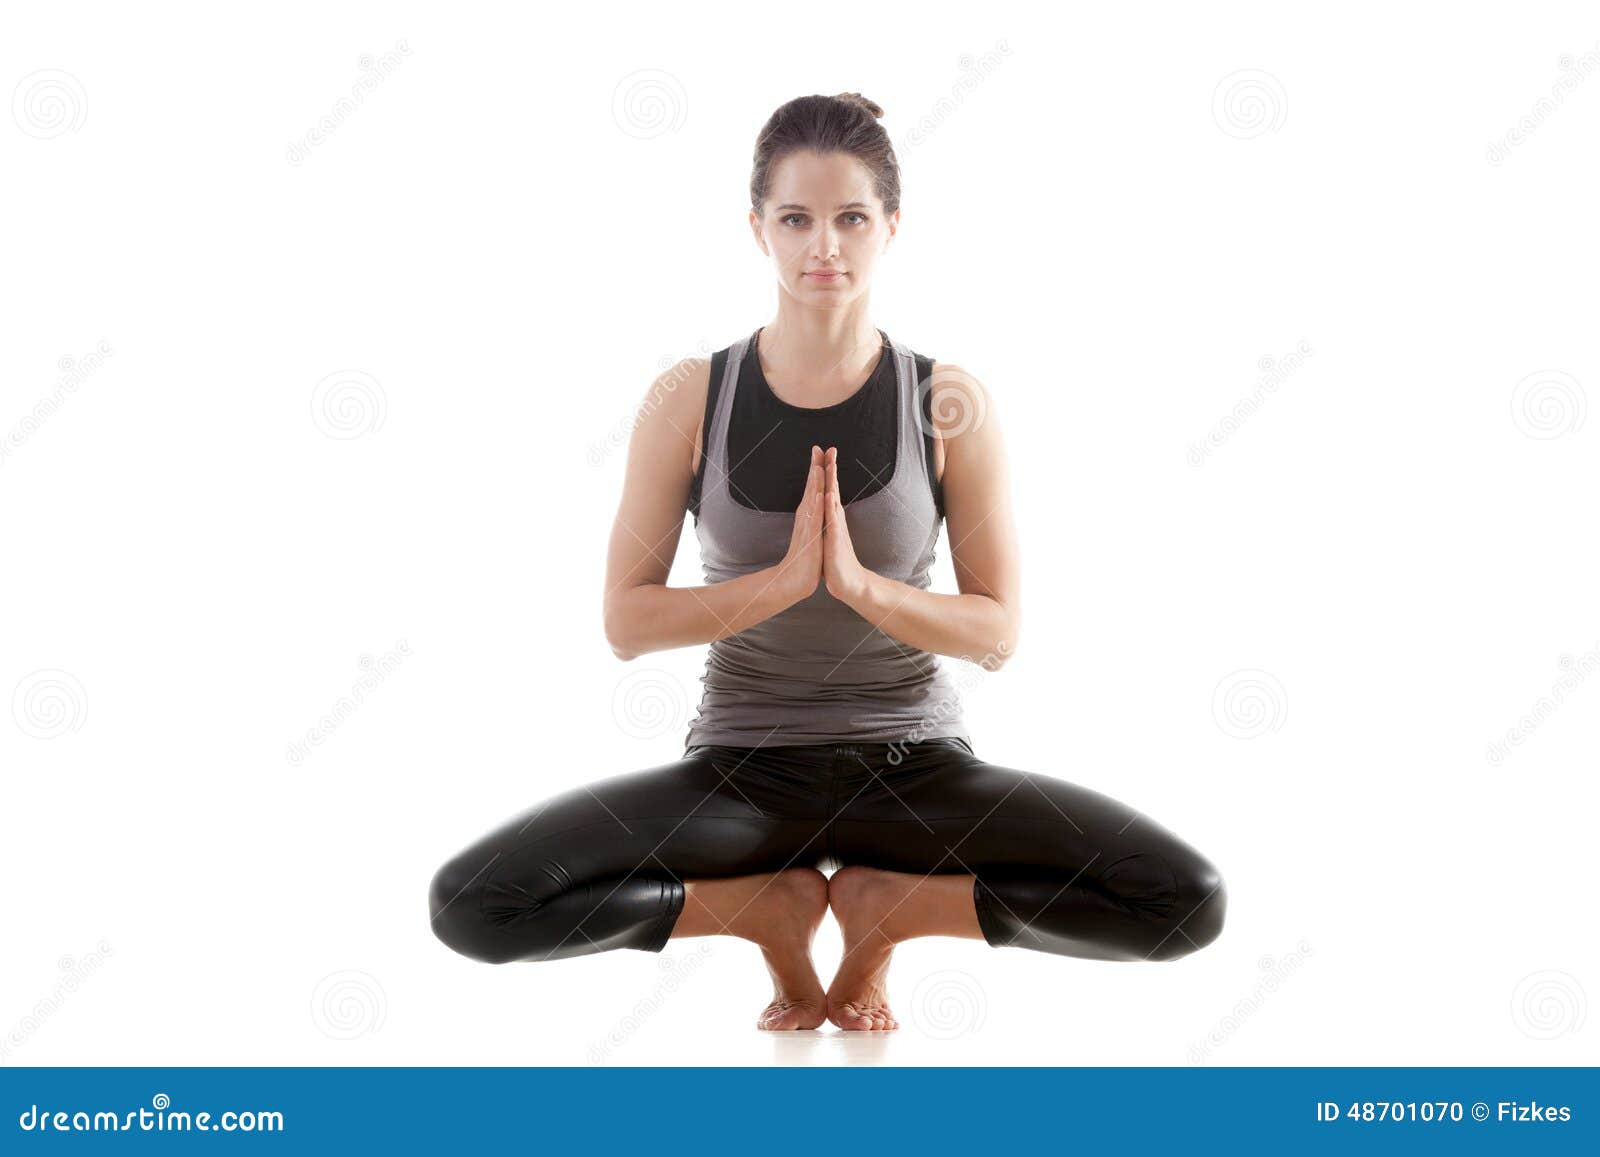 What are mudras and how they are used? | Yoga Course